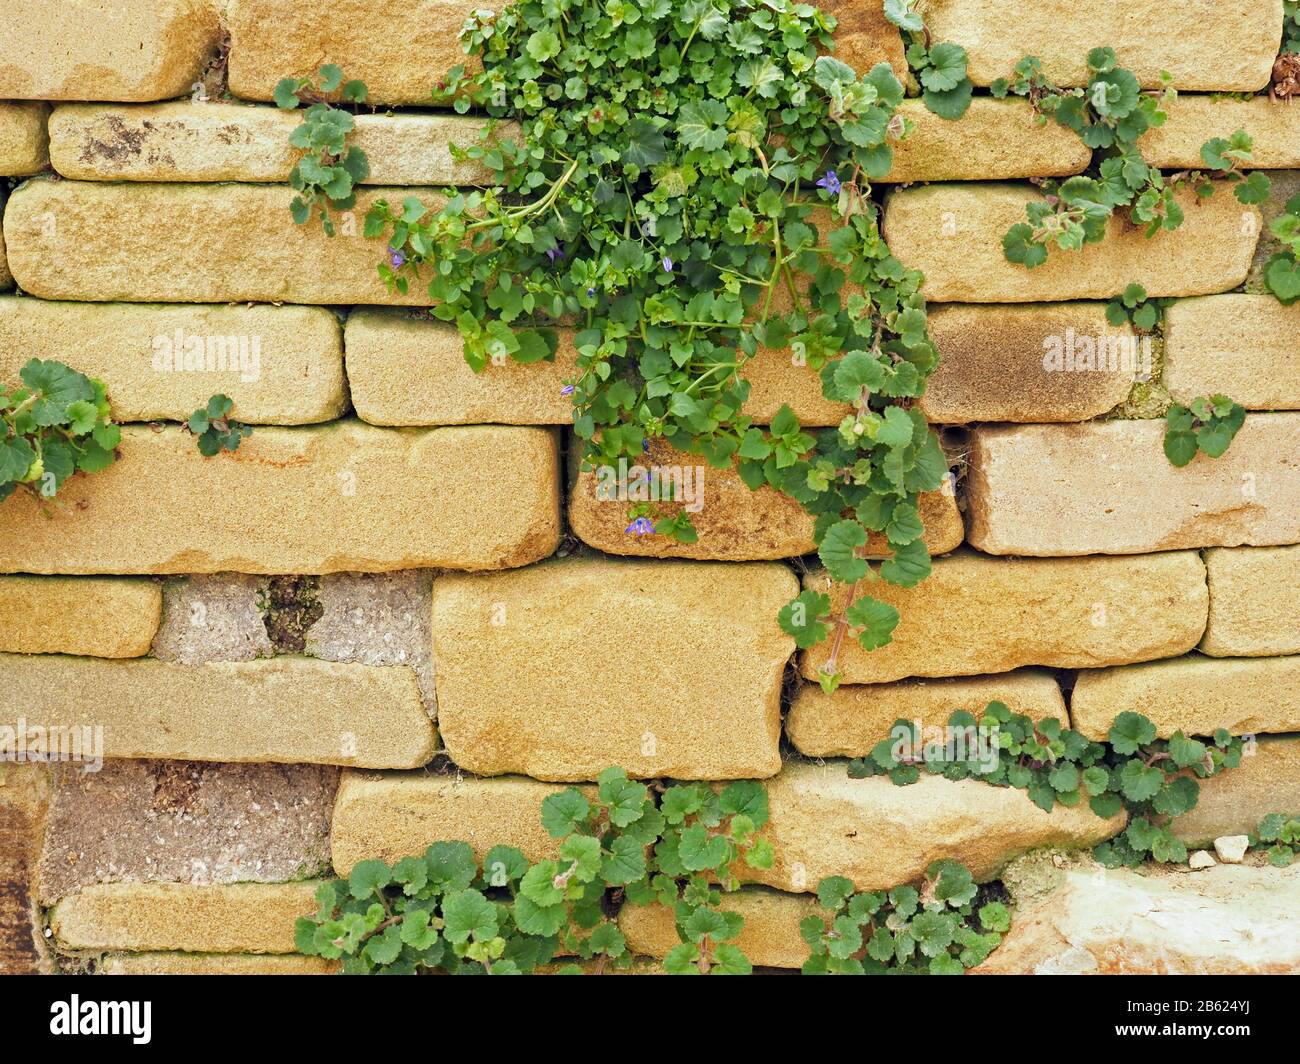 Rustic stone garden wall with leaves and buds of a Campanula portenschlagiana plant Stock Photo